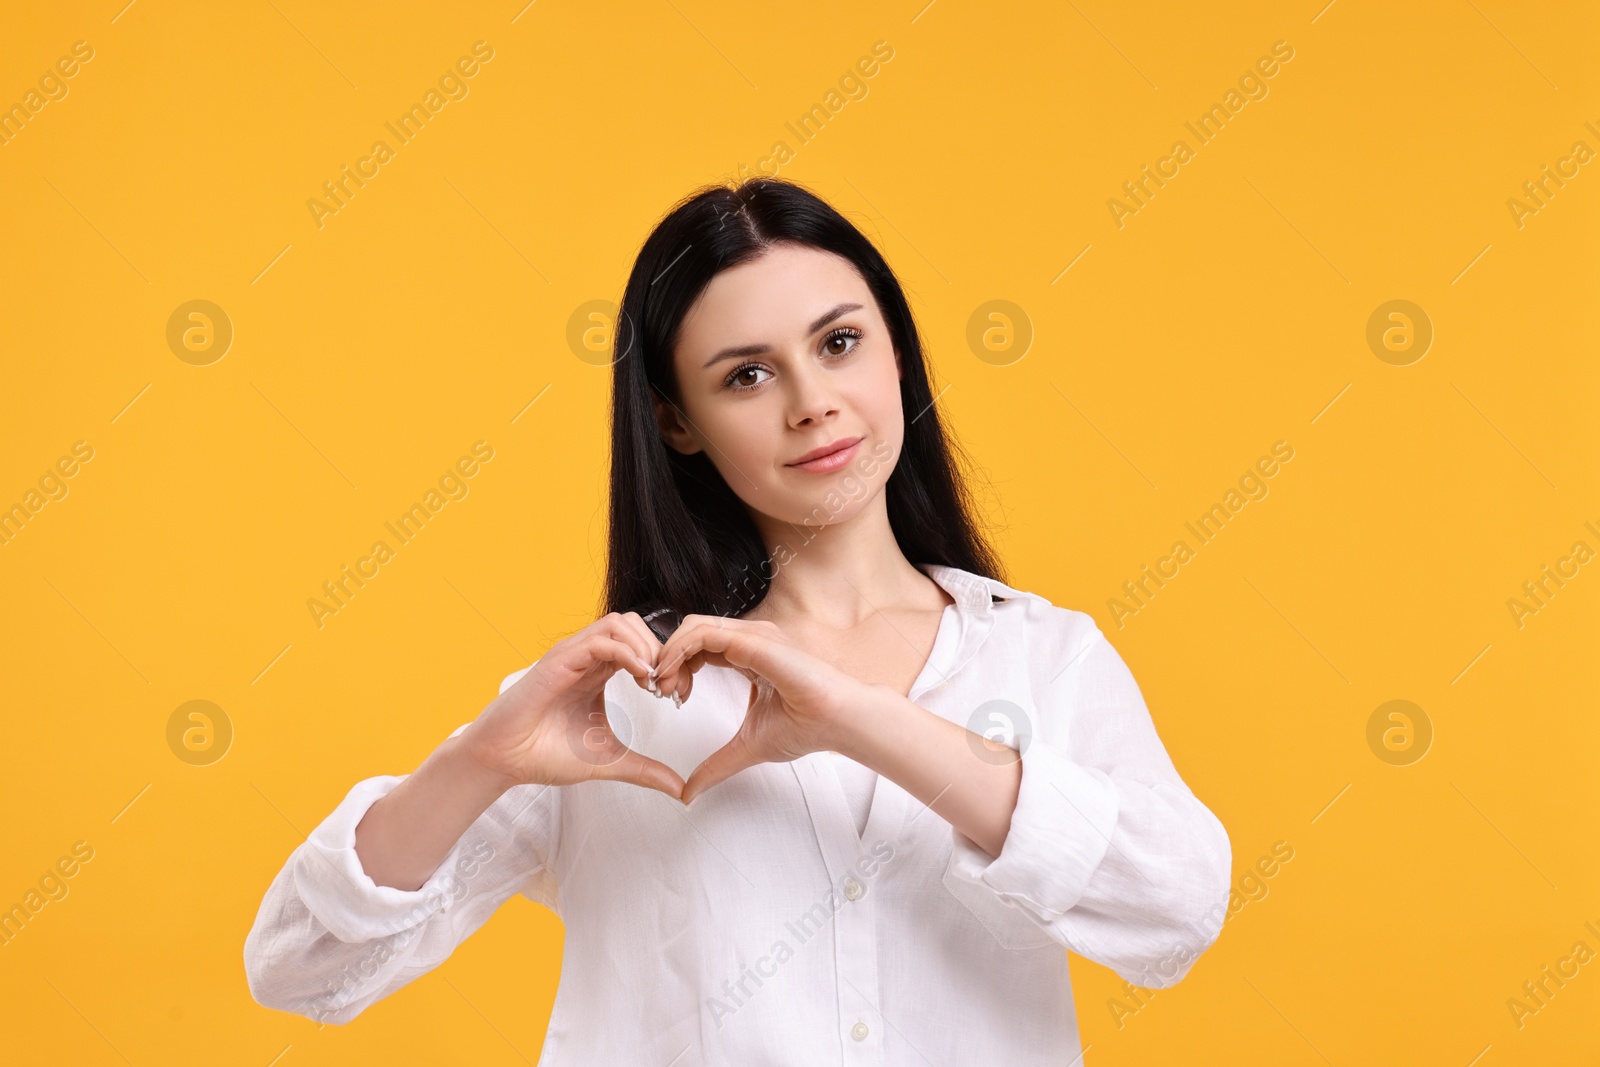 Photo of Beautiful woman showing heart gesture with hands on orange background